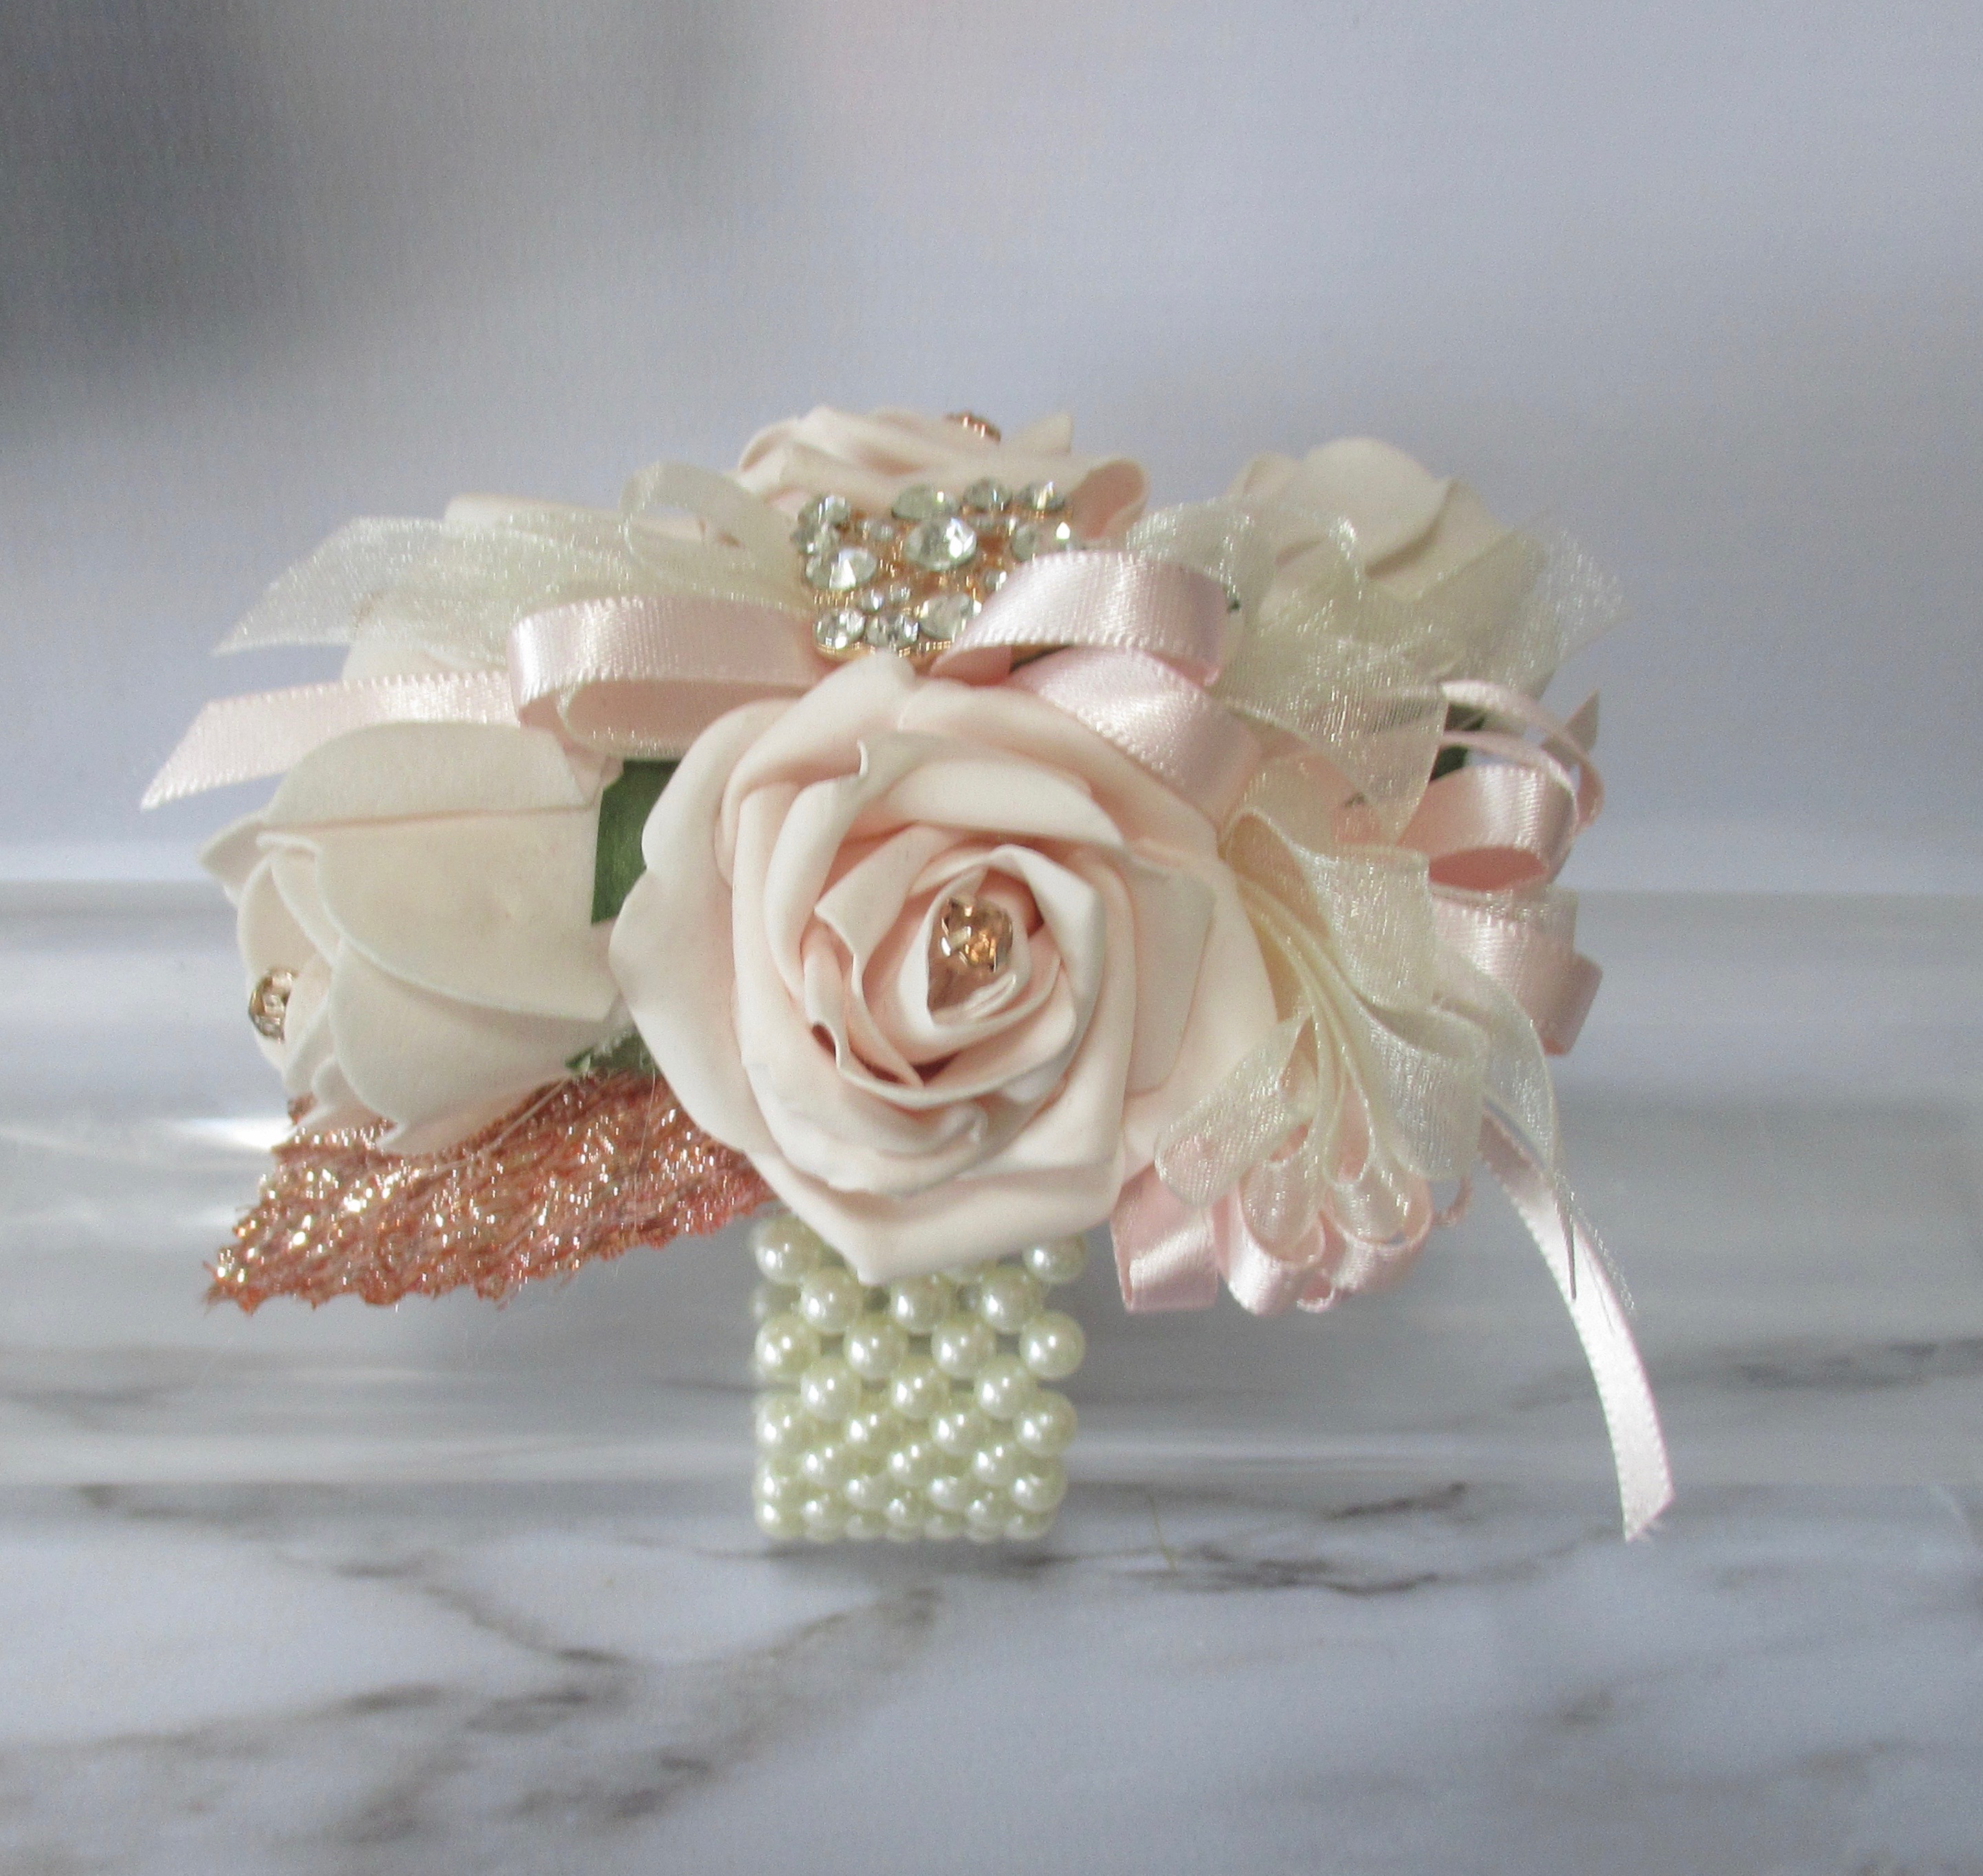 Blush and Rose Gold Wrist Corsage, Prpm Corsage Blush, Wrist Corsage Rose Gold